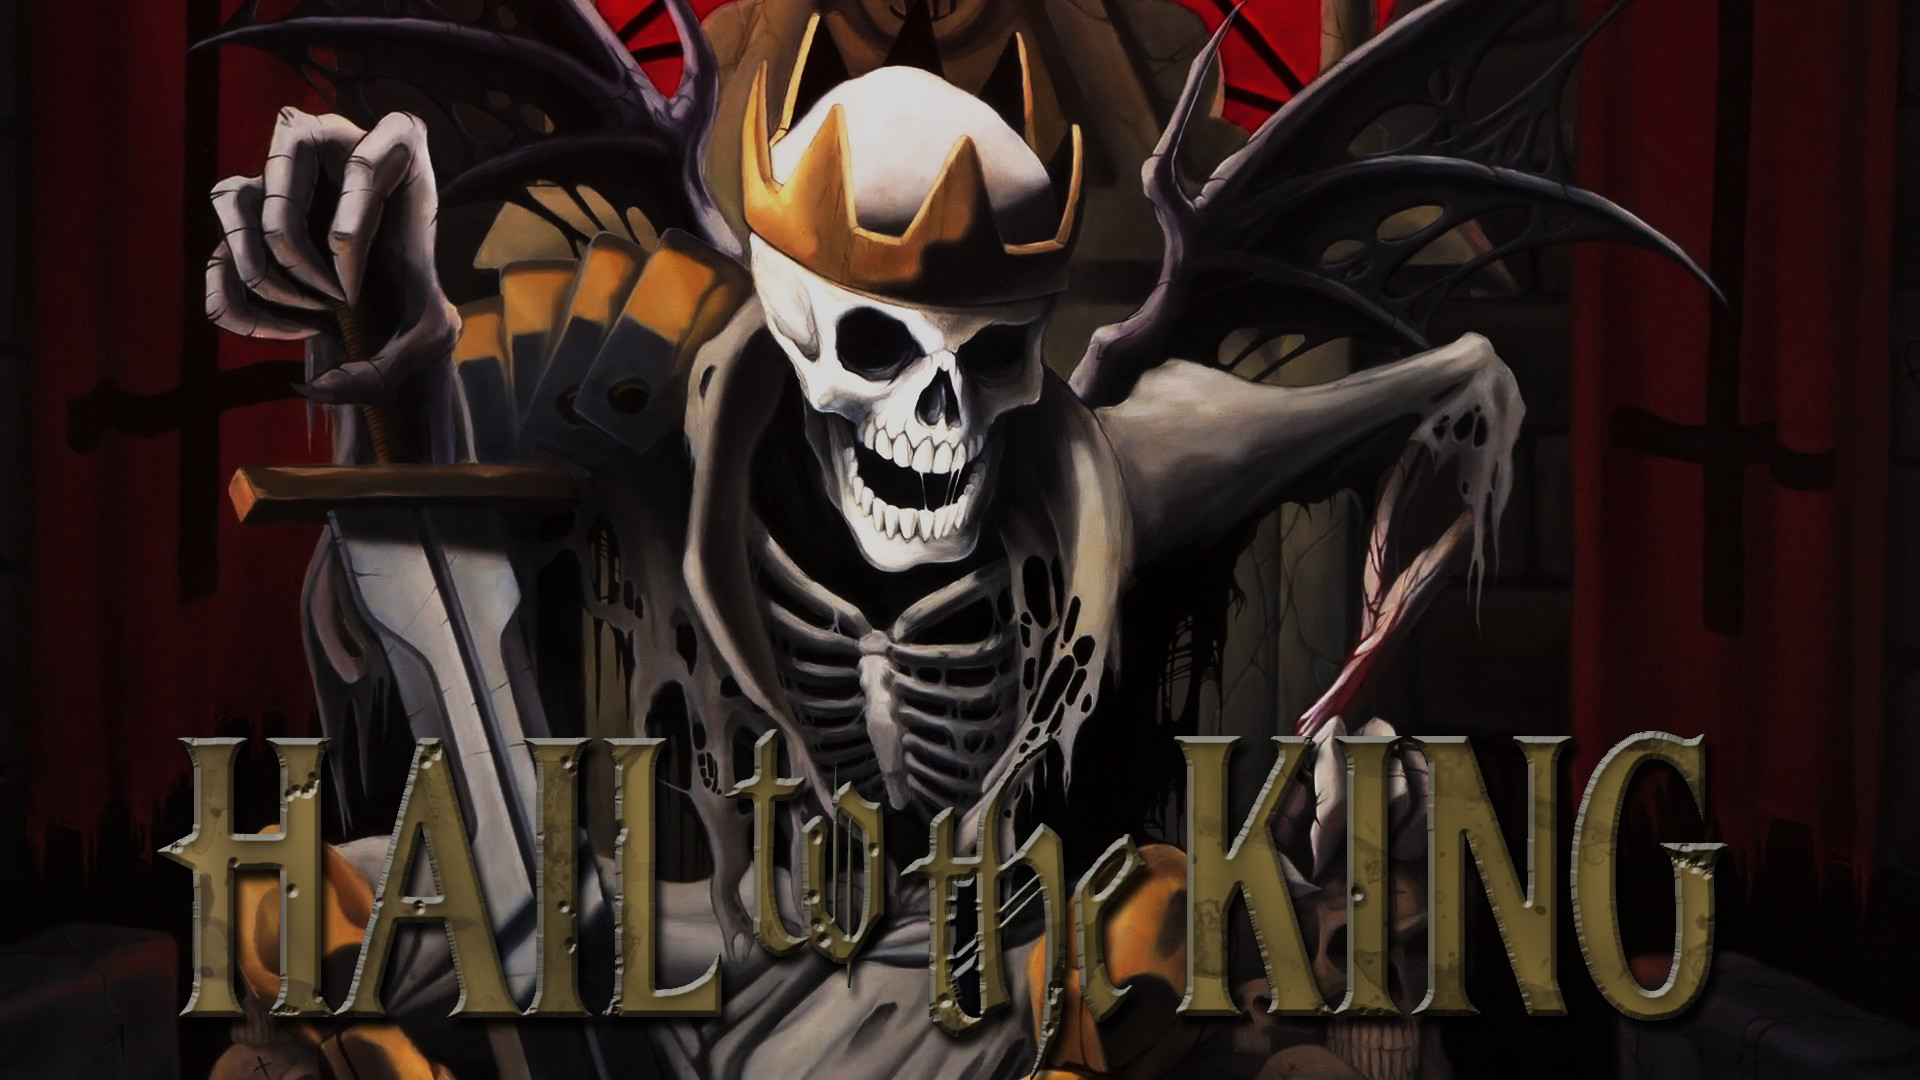 1920x1080 Hail to the King: Deathbat A7X Wallpaper HD Wallpaper with  .